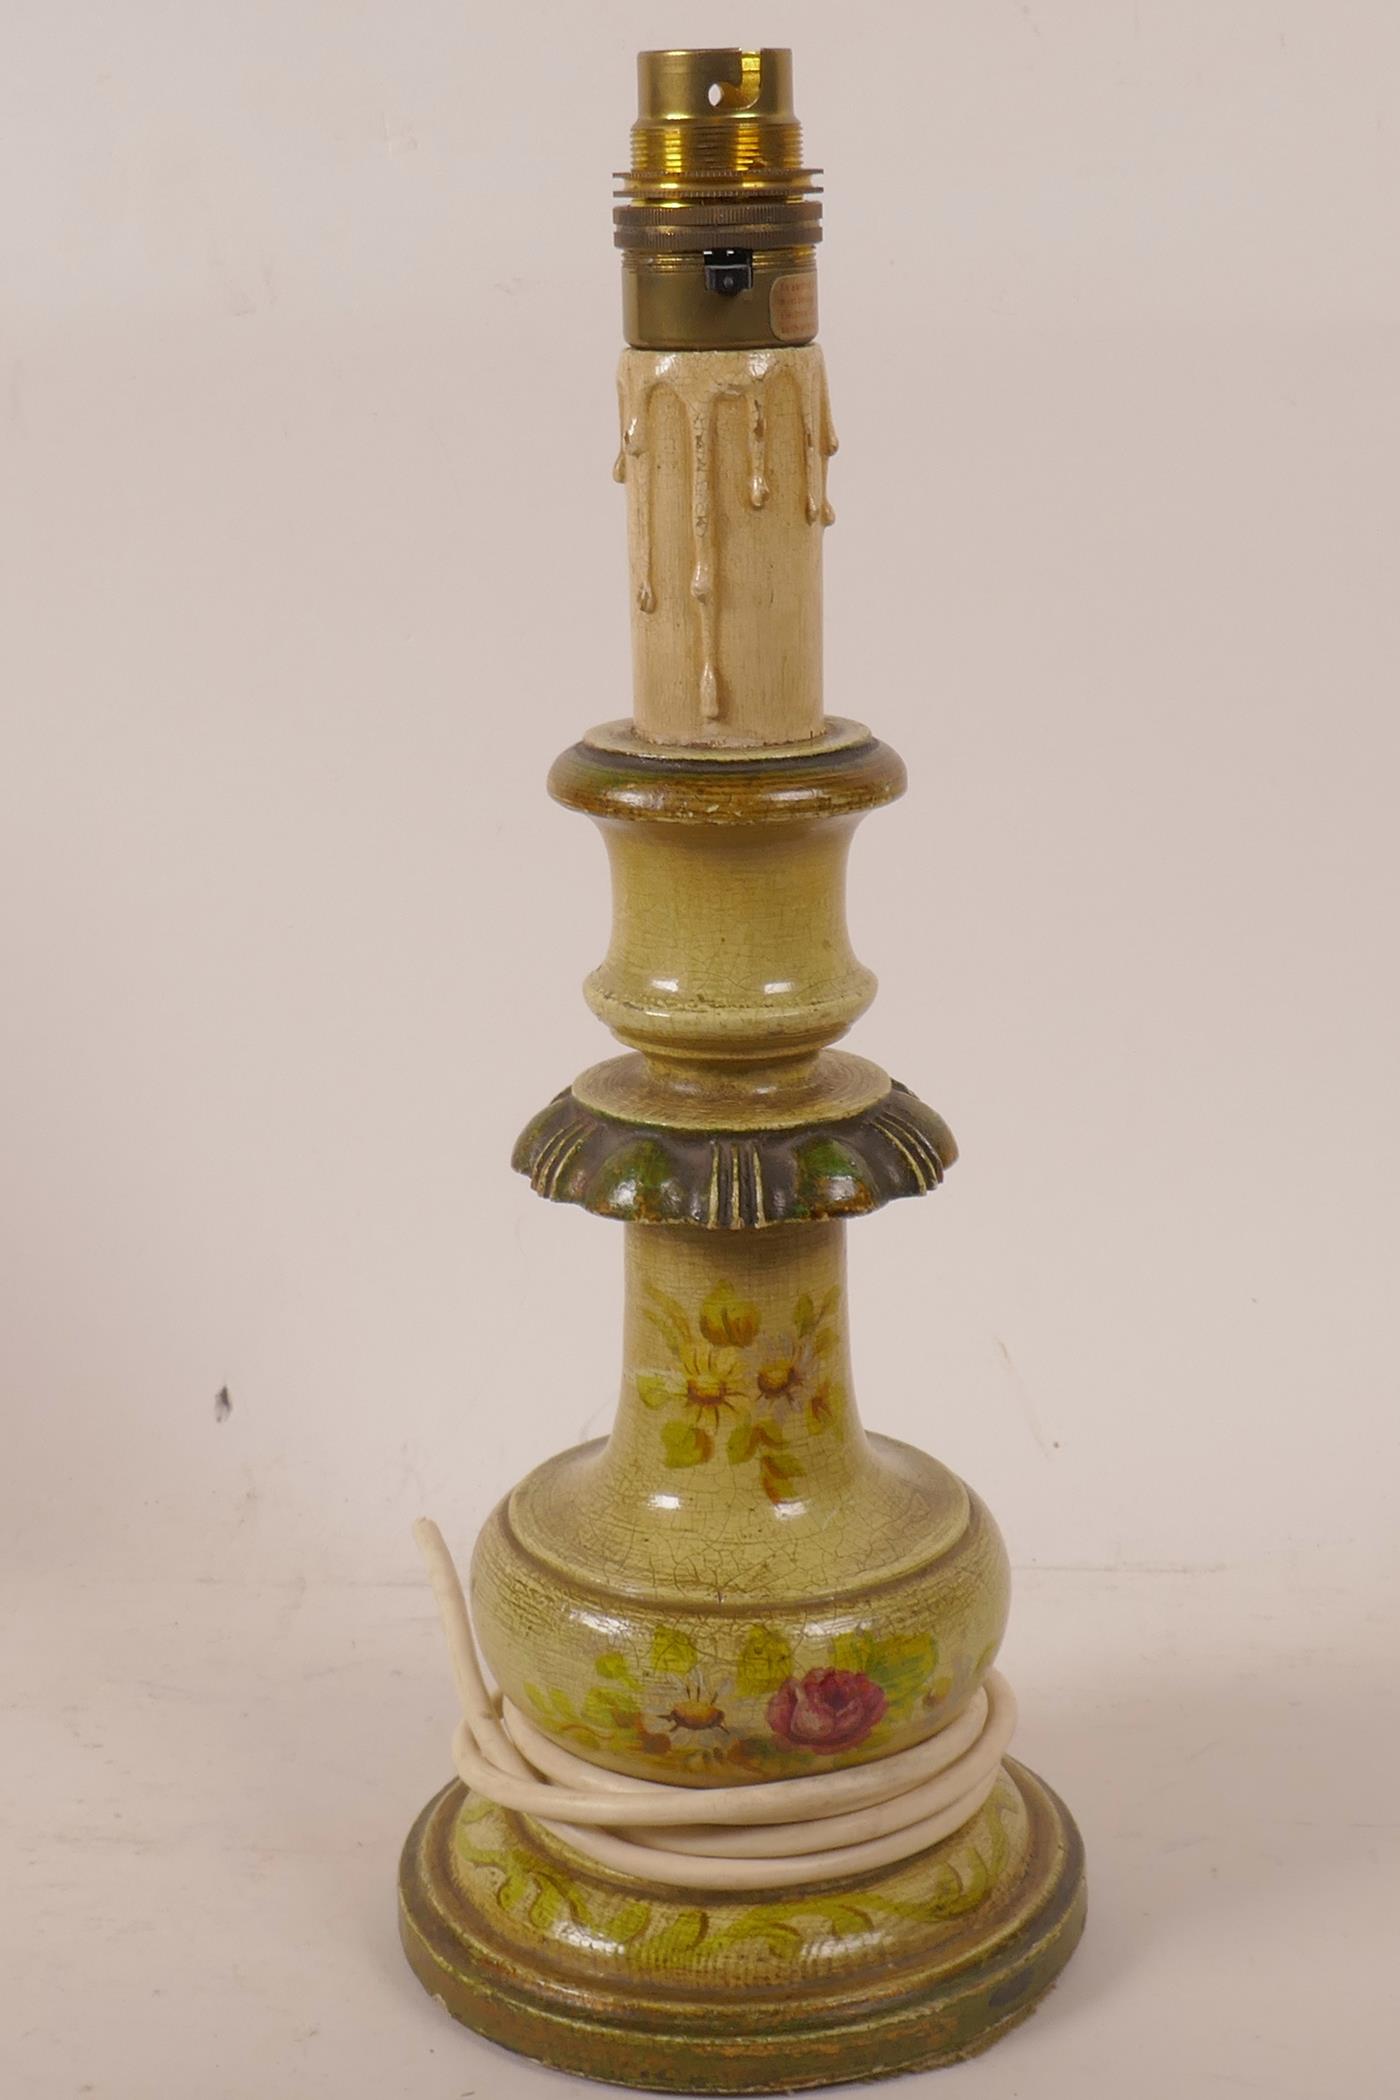 An Italianate painted turned wood table lamp base, 12" high